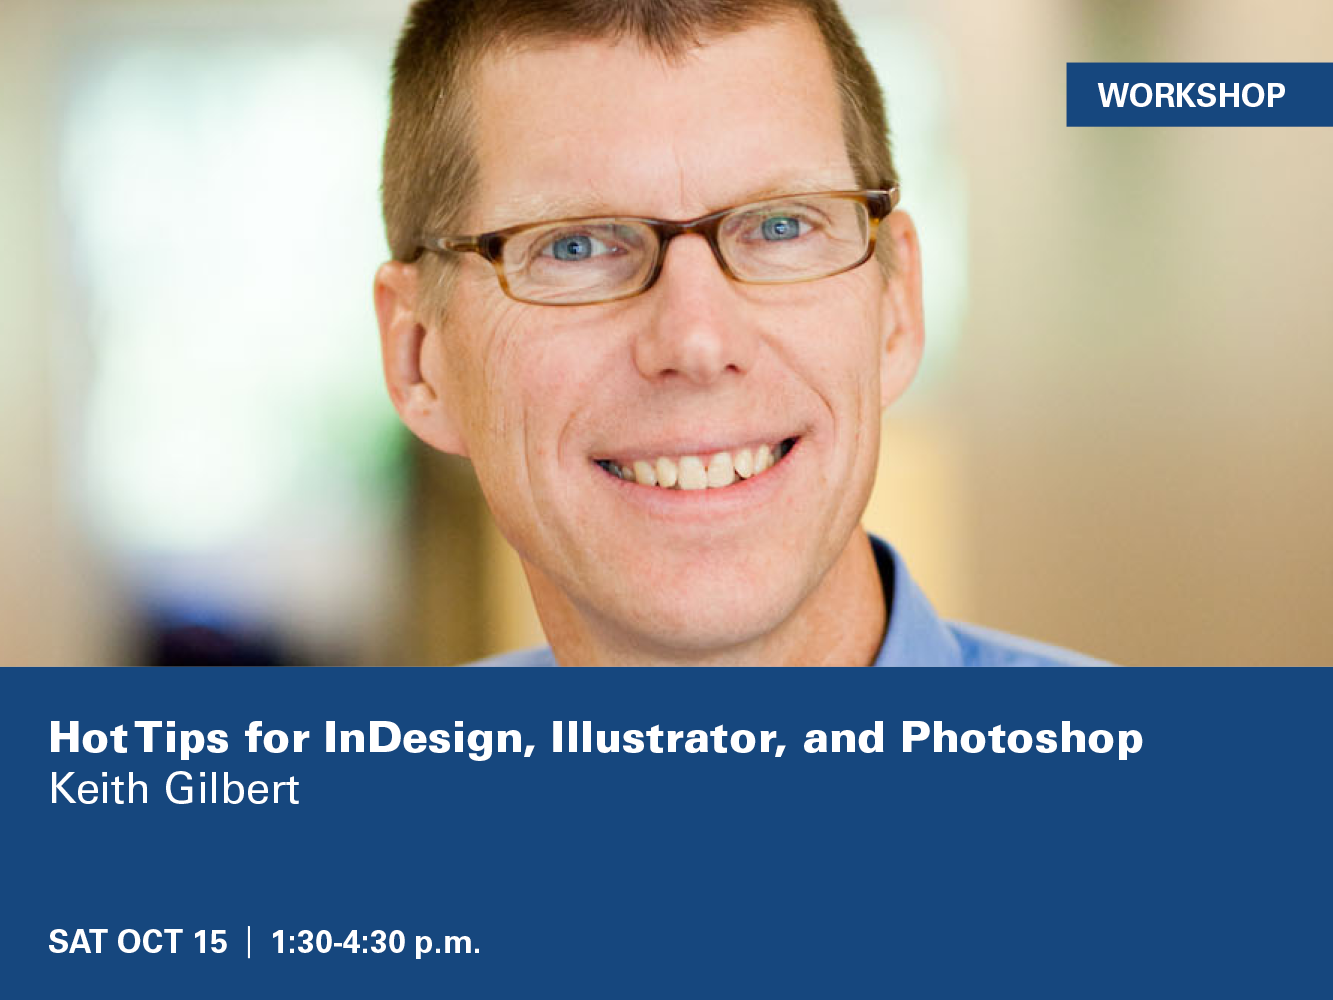 vHot Tips for InDesign, Illustrator, and Photoshop Keith Gilbert